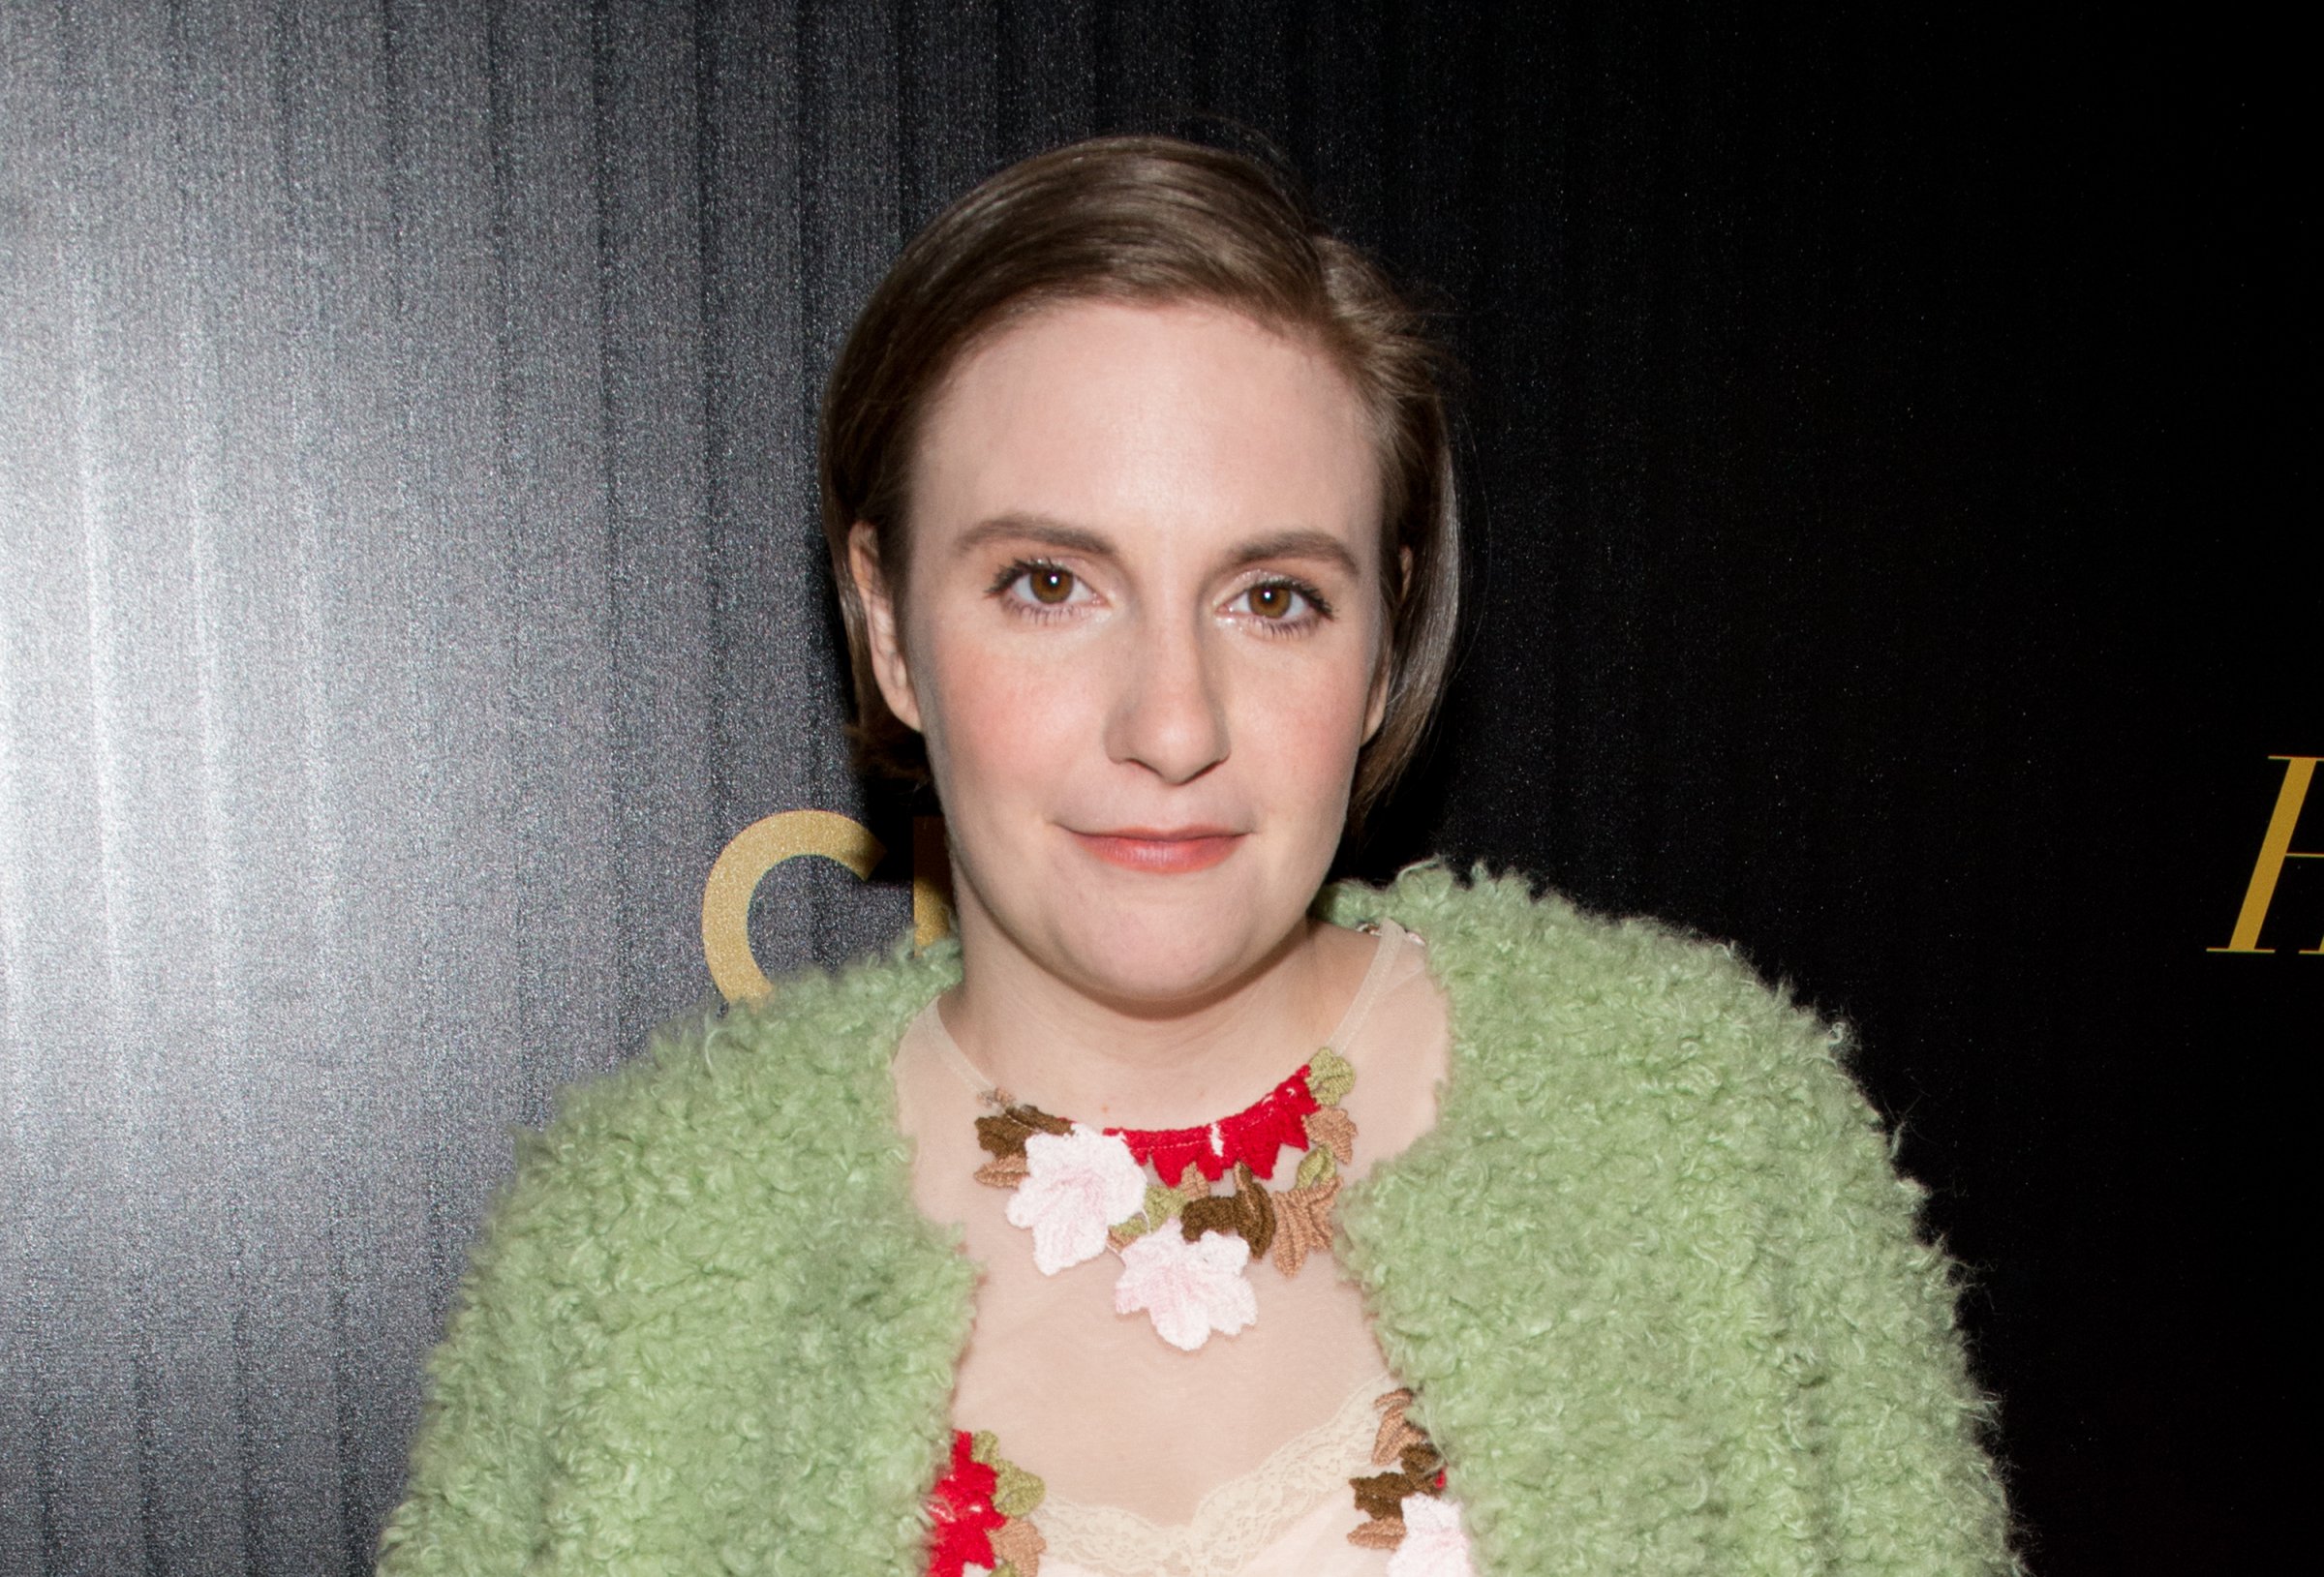 Actress Lena Dunham attends The Hollywood Reporter's 2016 35 Most Powerful People in Media at Four Seasons Restaurant on April 6, 2016 in New York City.